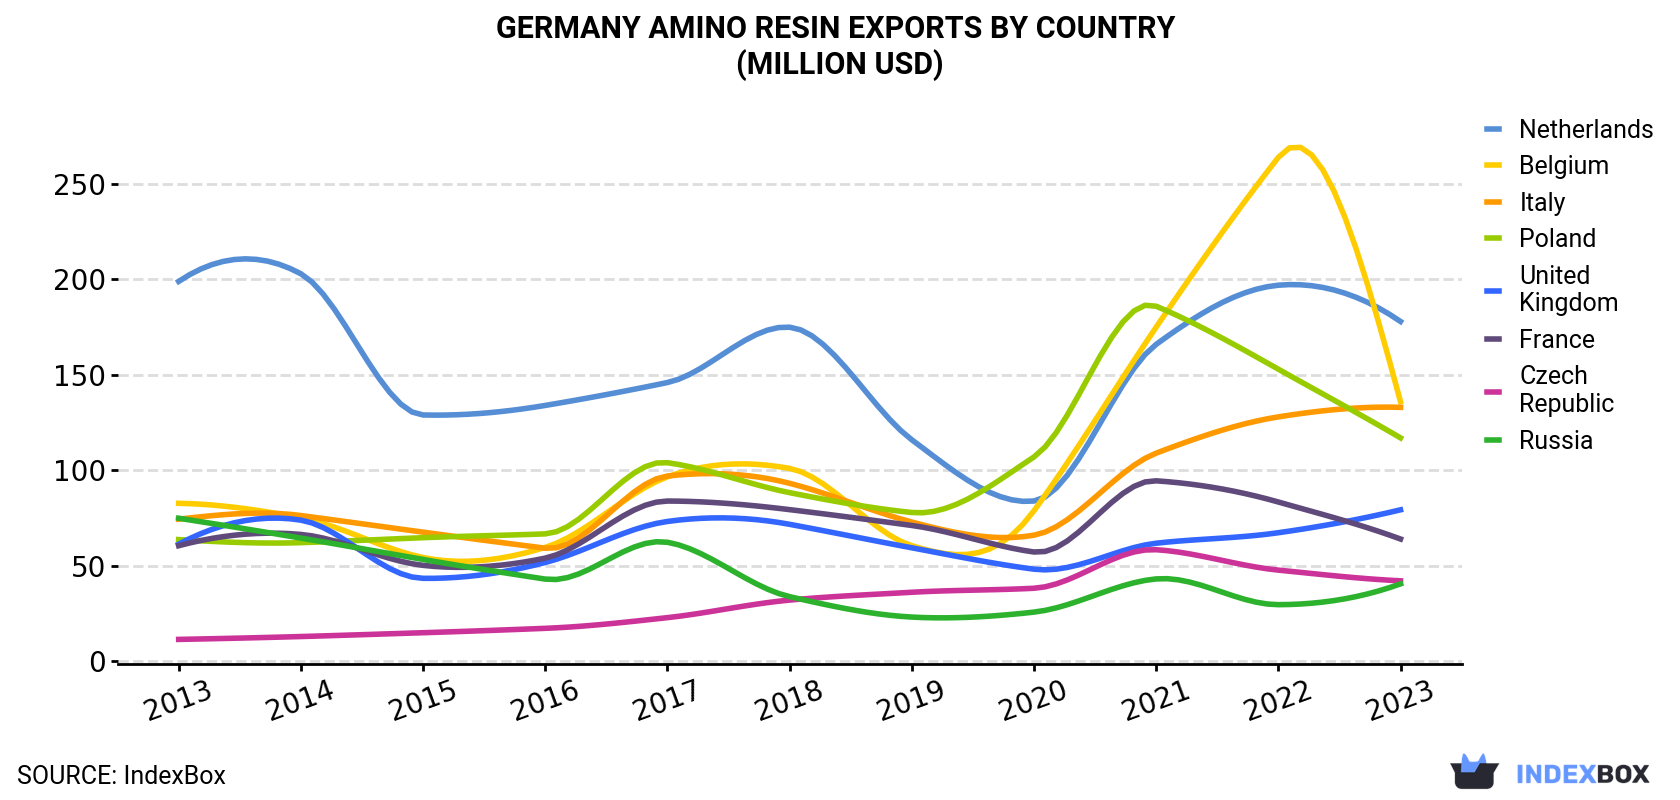 Germany Amino Resin Exports By Country (Million USD)